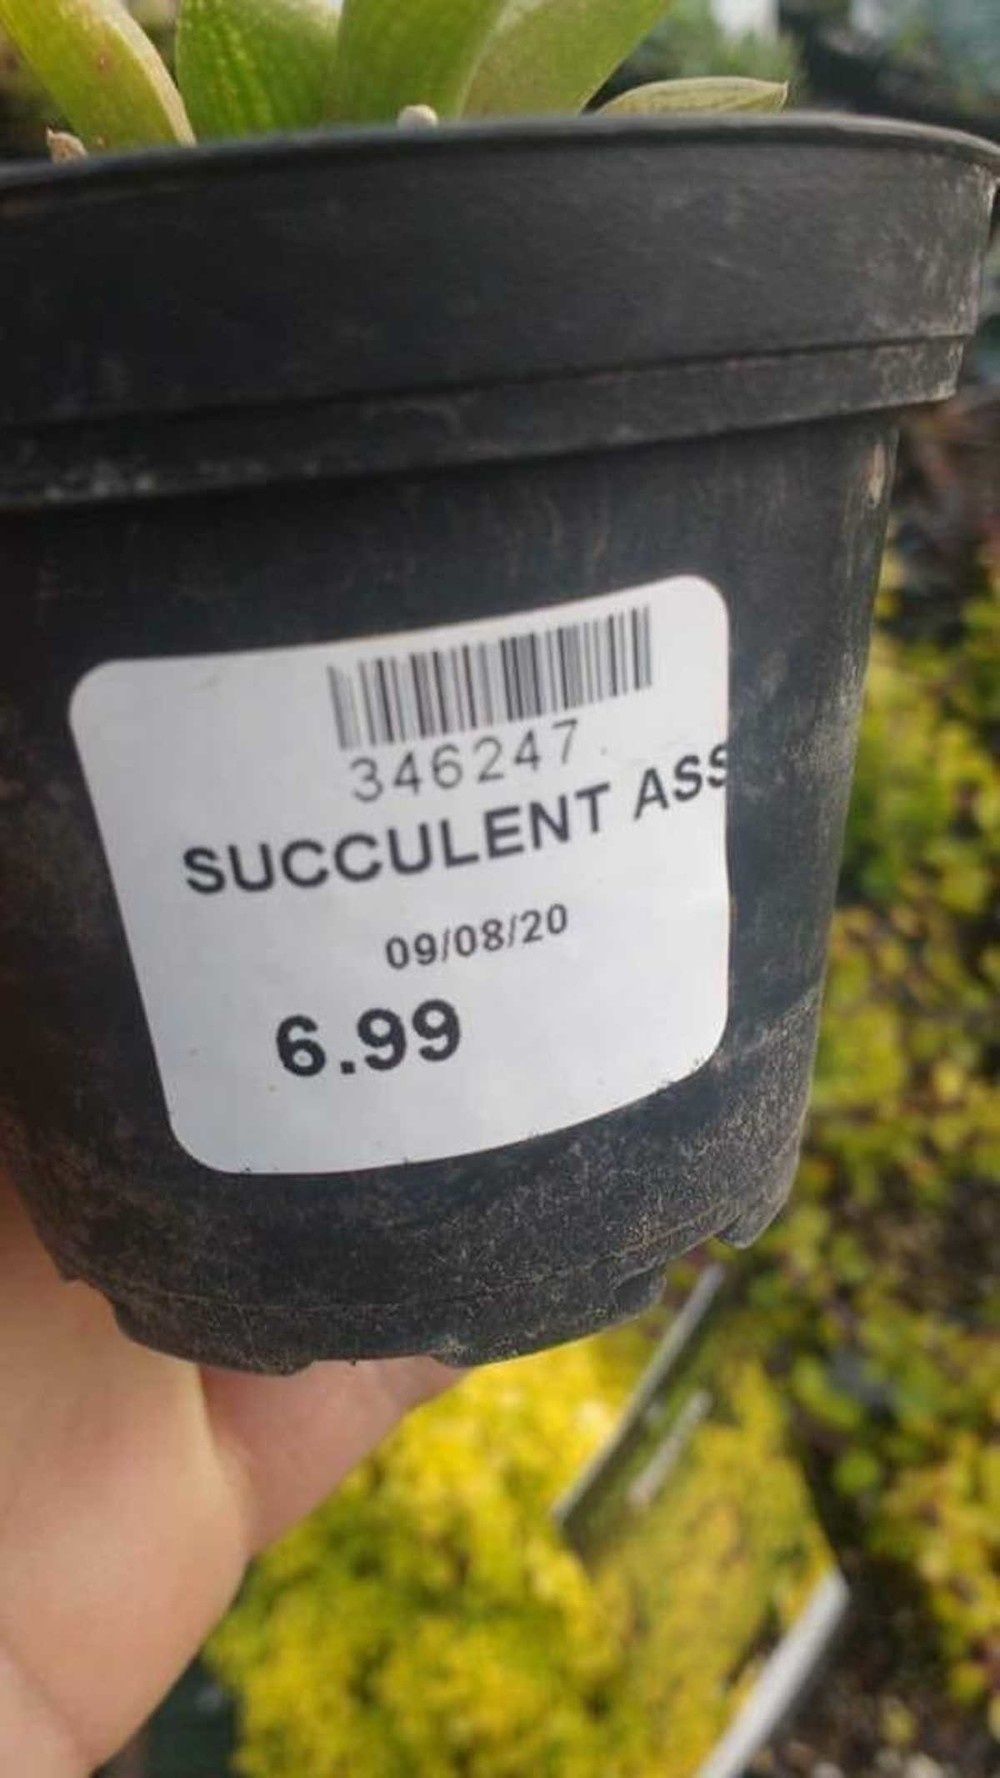 An interesting name for an interesting plant